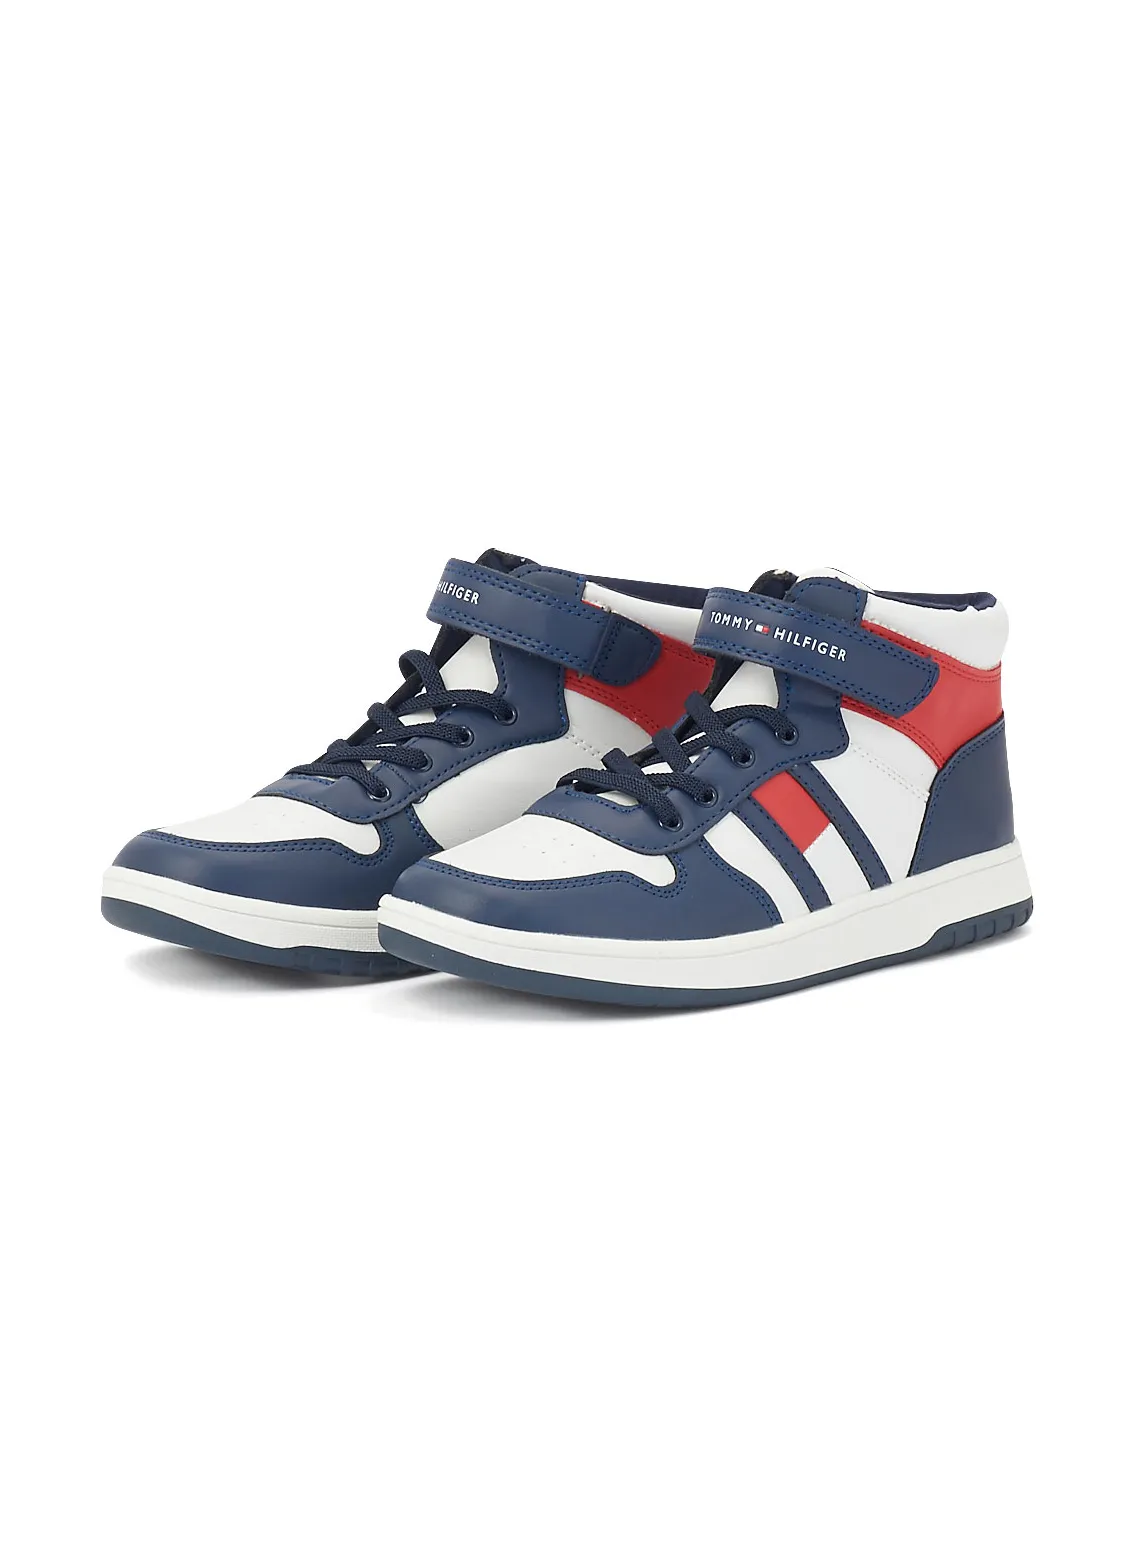 TOMMY HILFIGER High Top Lace | up/Velcro - Sneakers Blue/White/Red Youth Choice+Attitude